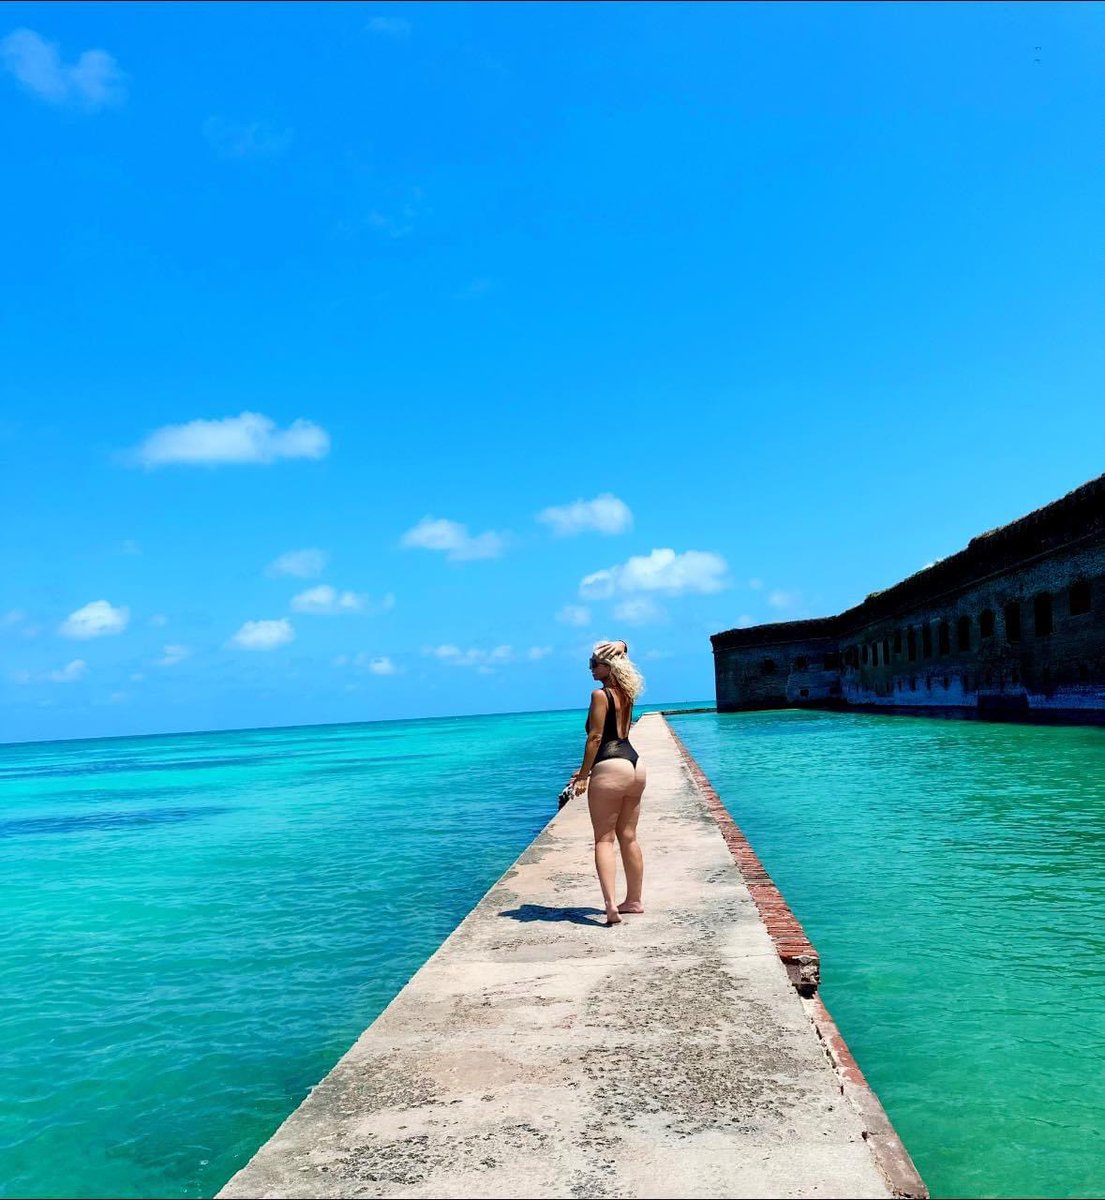 You are not a drop in the ocean. 
You are the entire ocean in a drop. 
Remember that babe ♥️
Dry Tortugas National Park #drytortugas